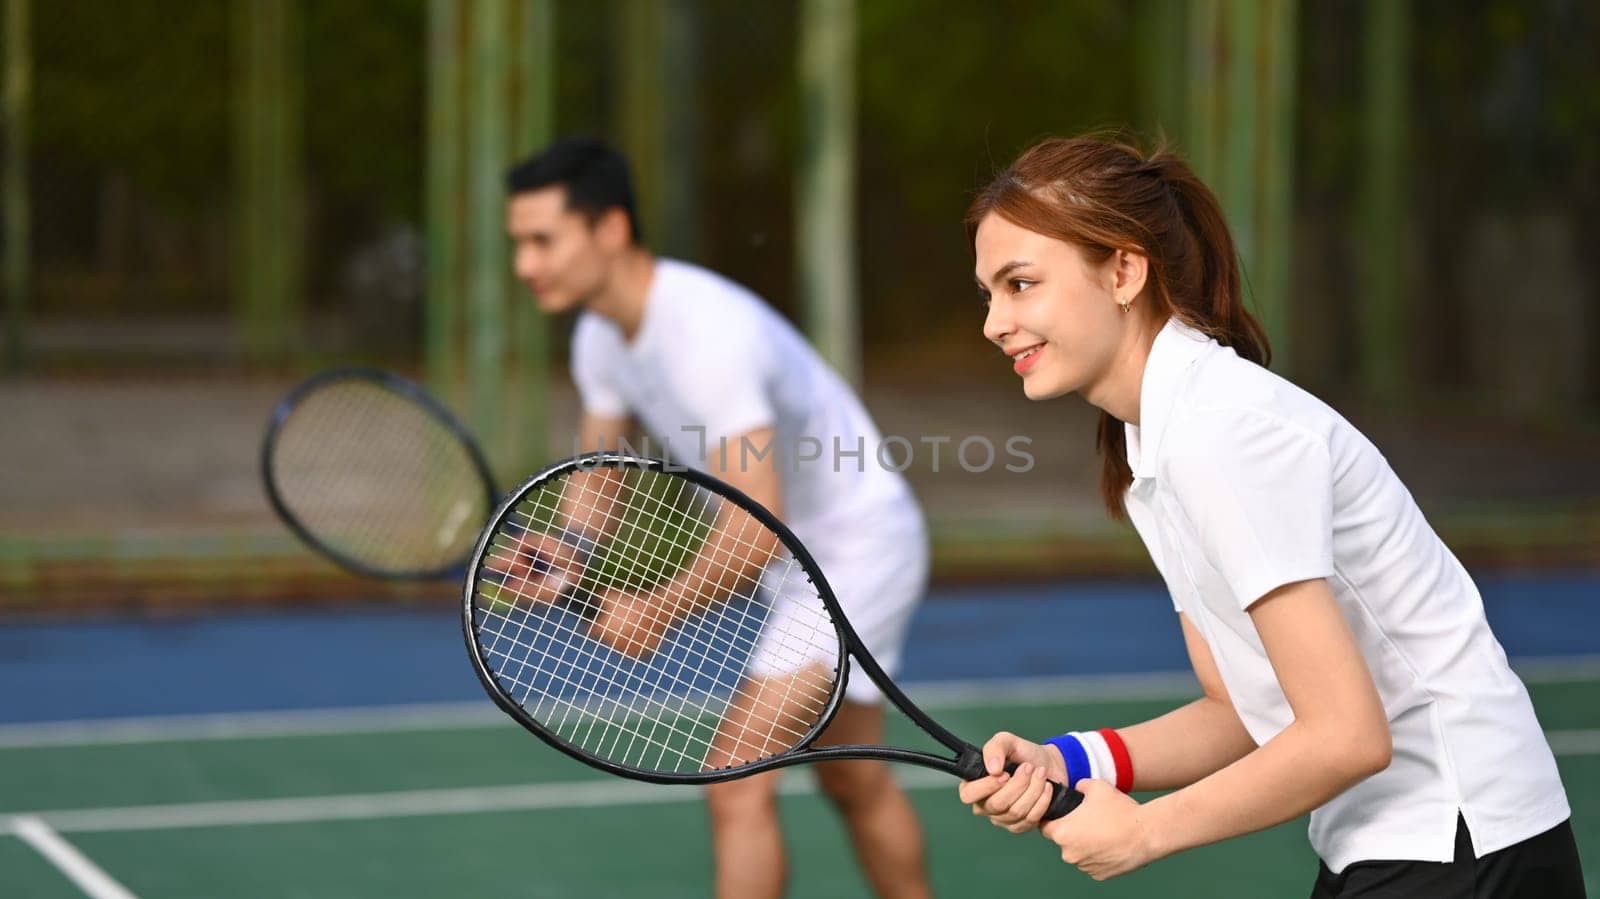 Two tennis players crouching in ready position and holding racket while waiting for serving ball during a competitive match.